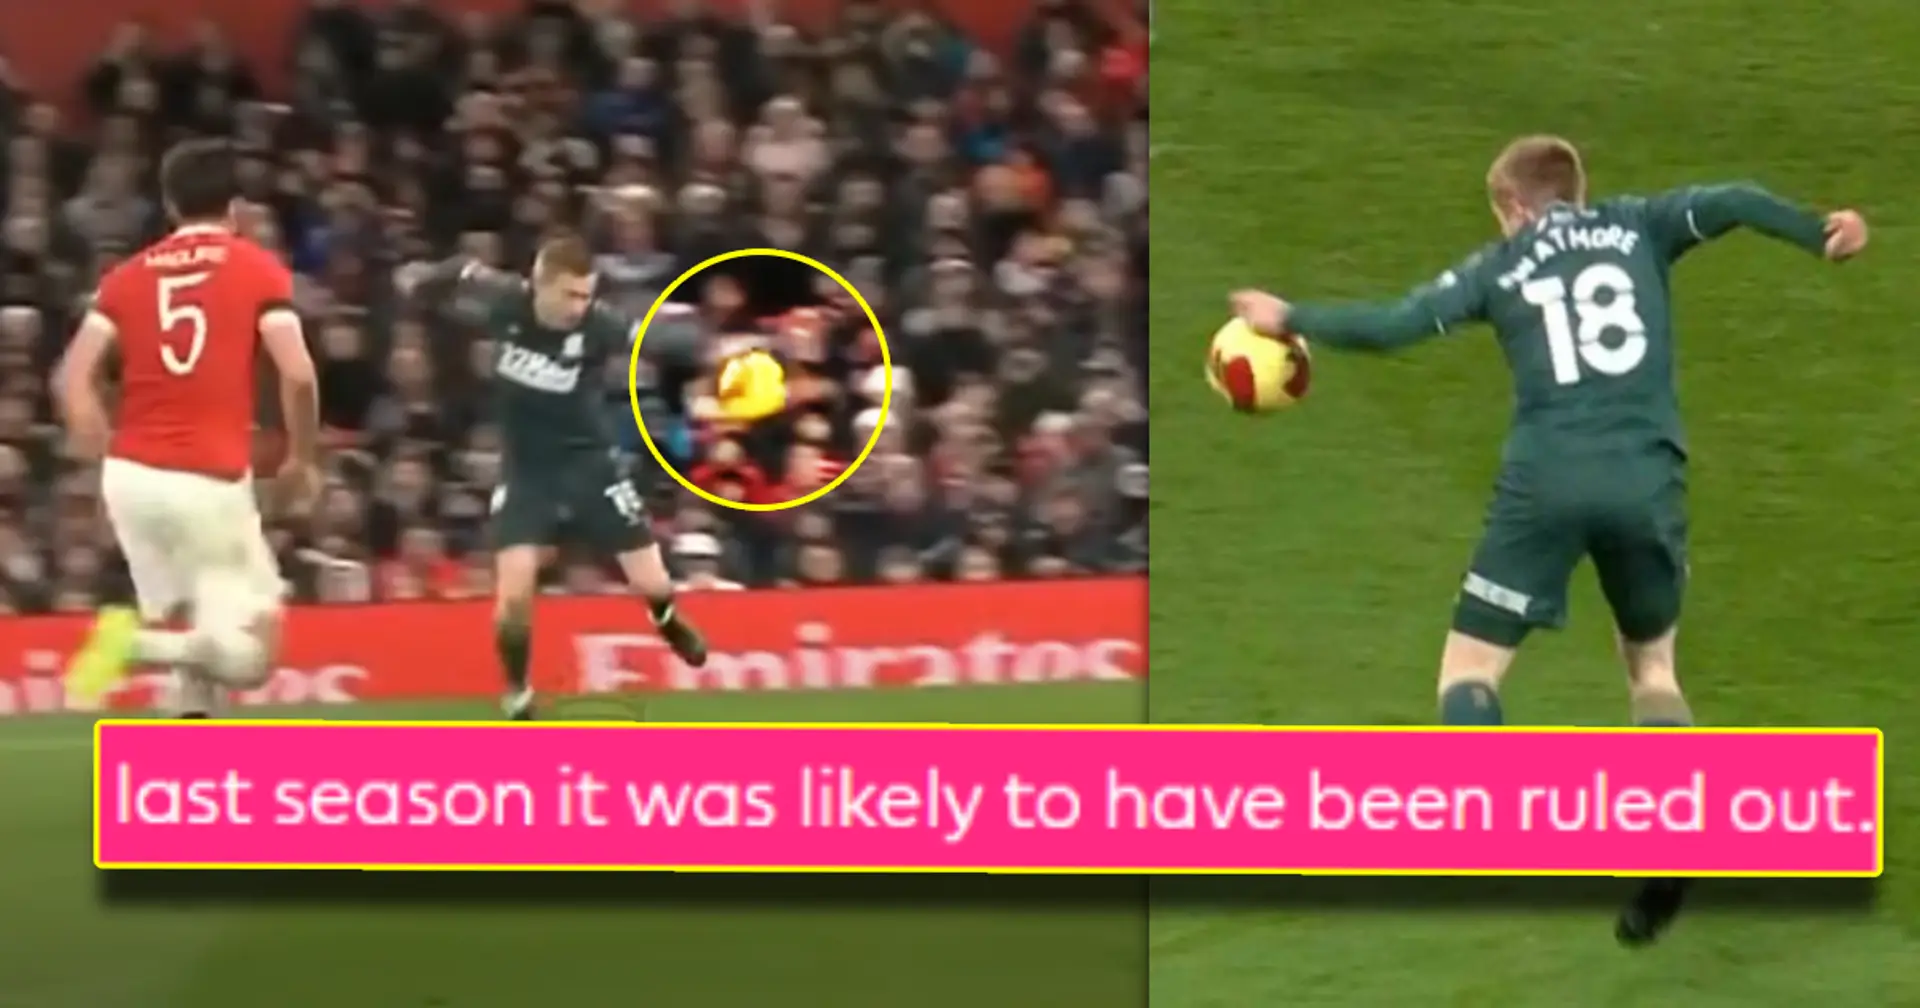 Why wasn't Middlesbrough's equalizer ruled out? You asked, PL rules answer